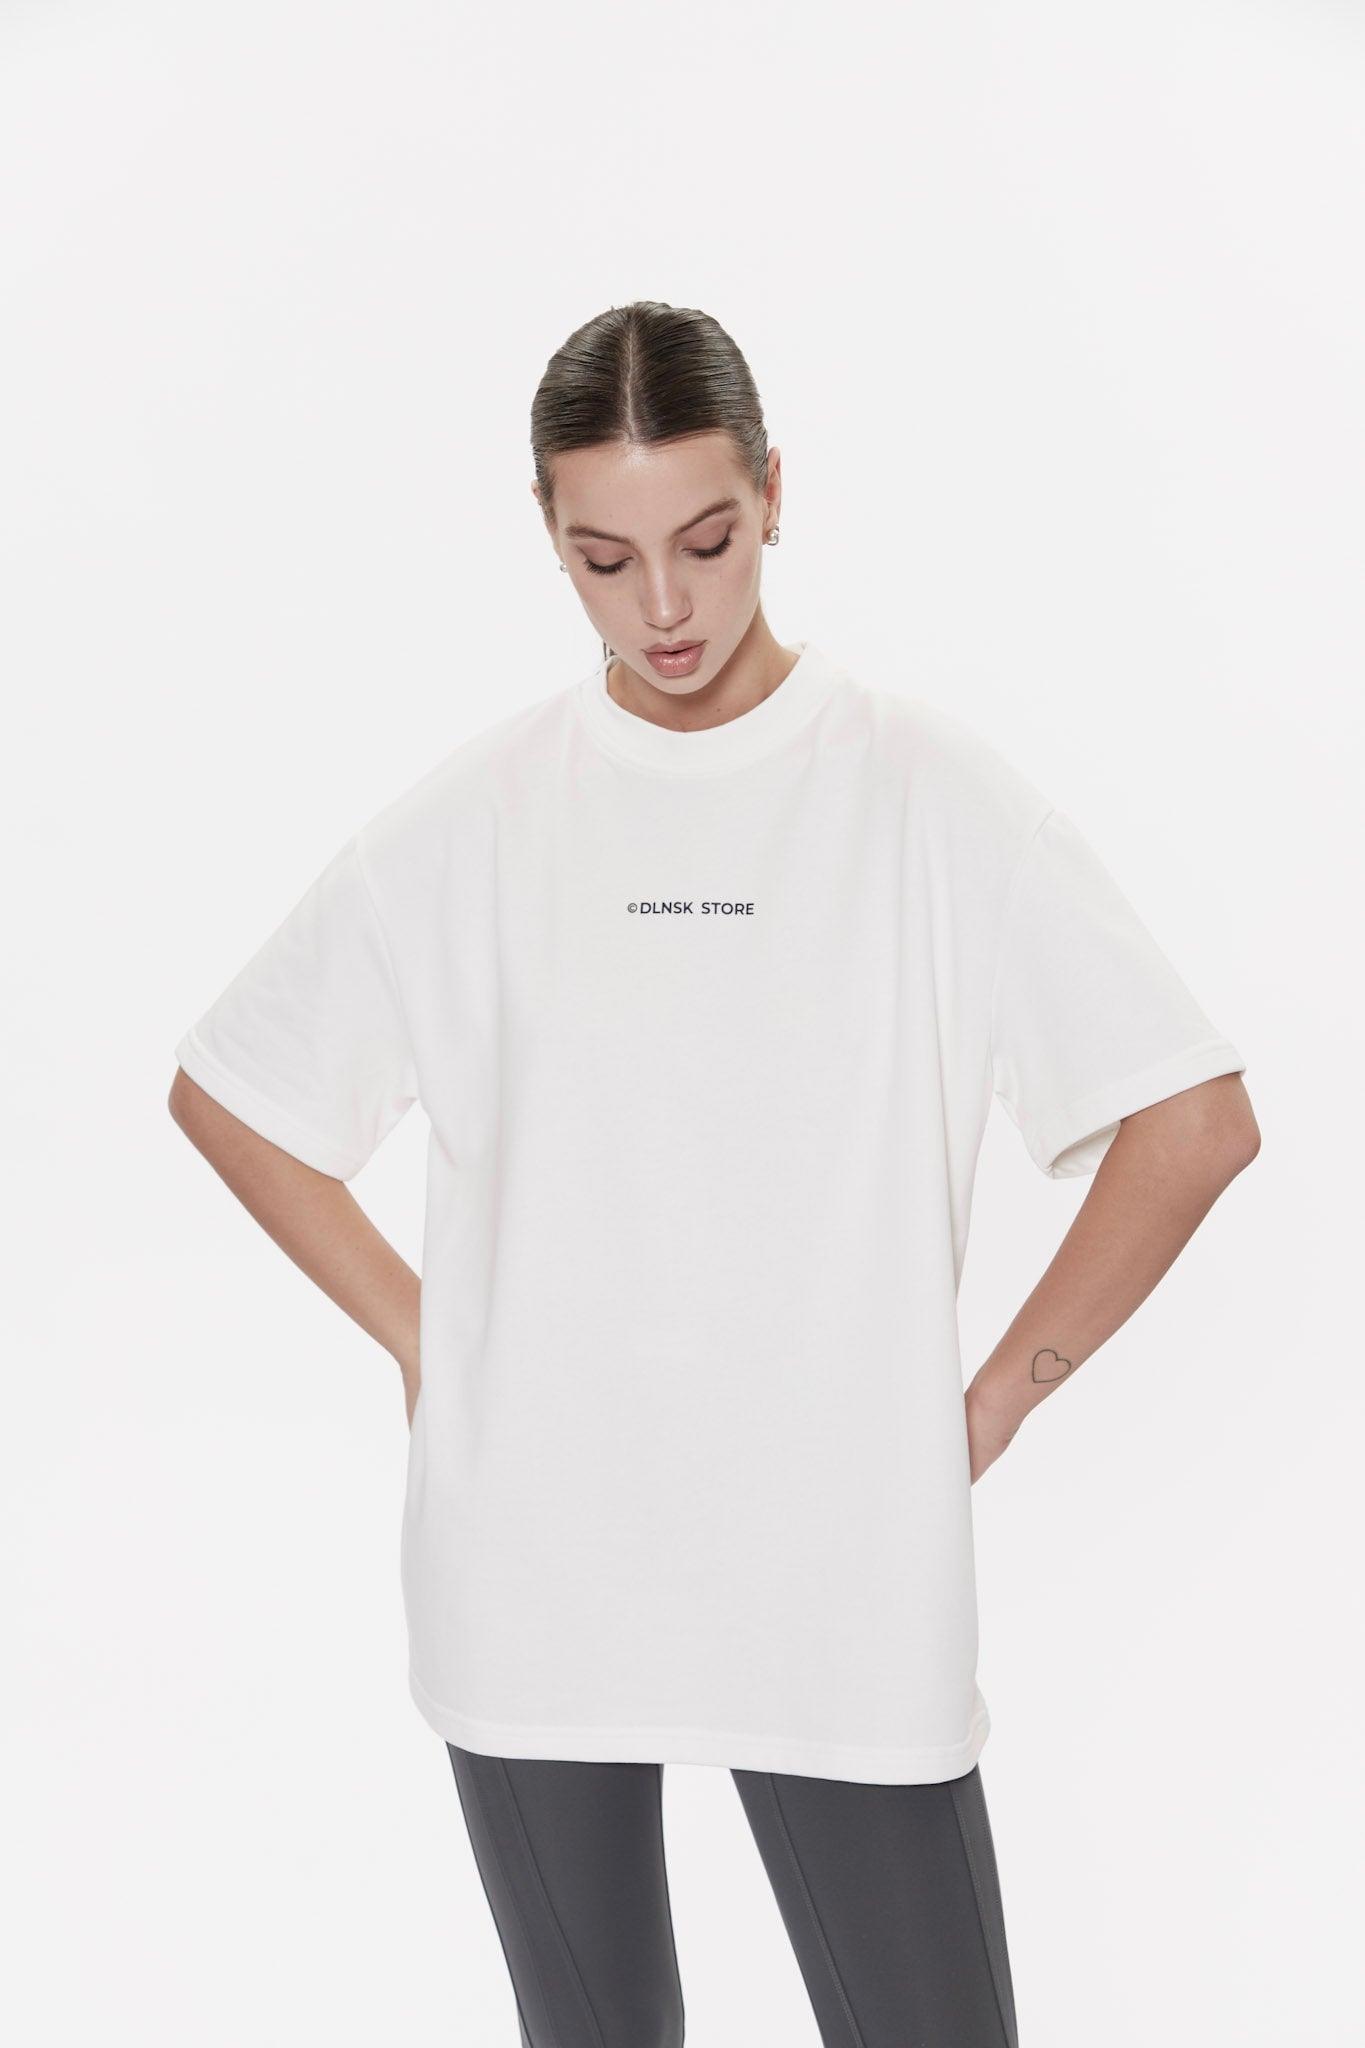 BASE T-SHIRT in CLOUDY WHITE DLNSK